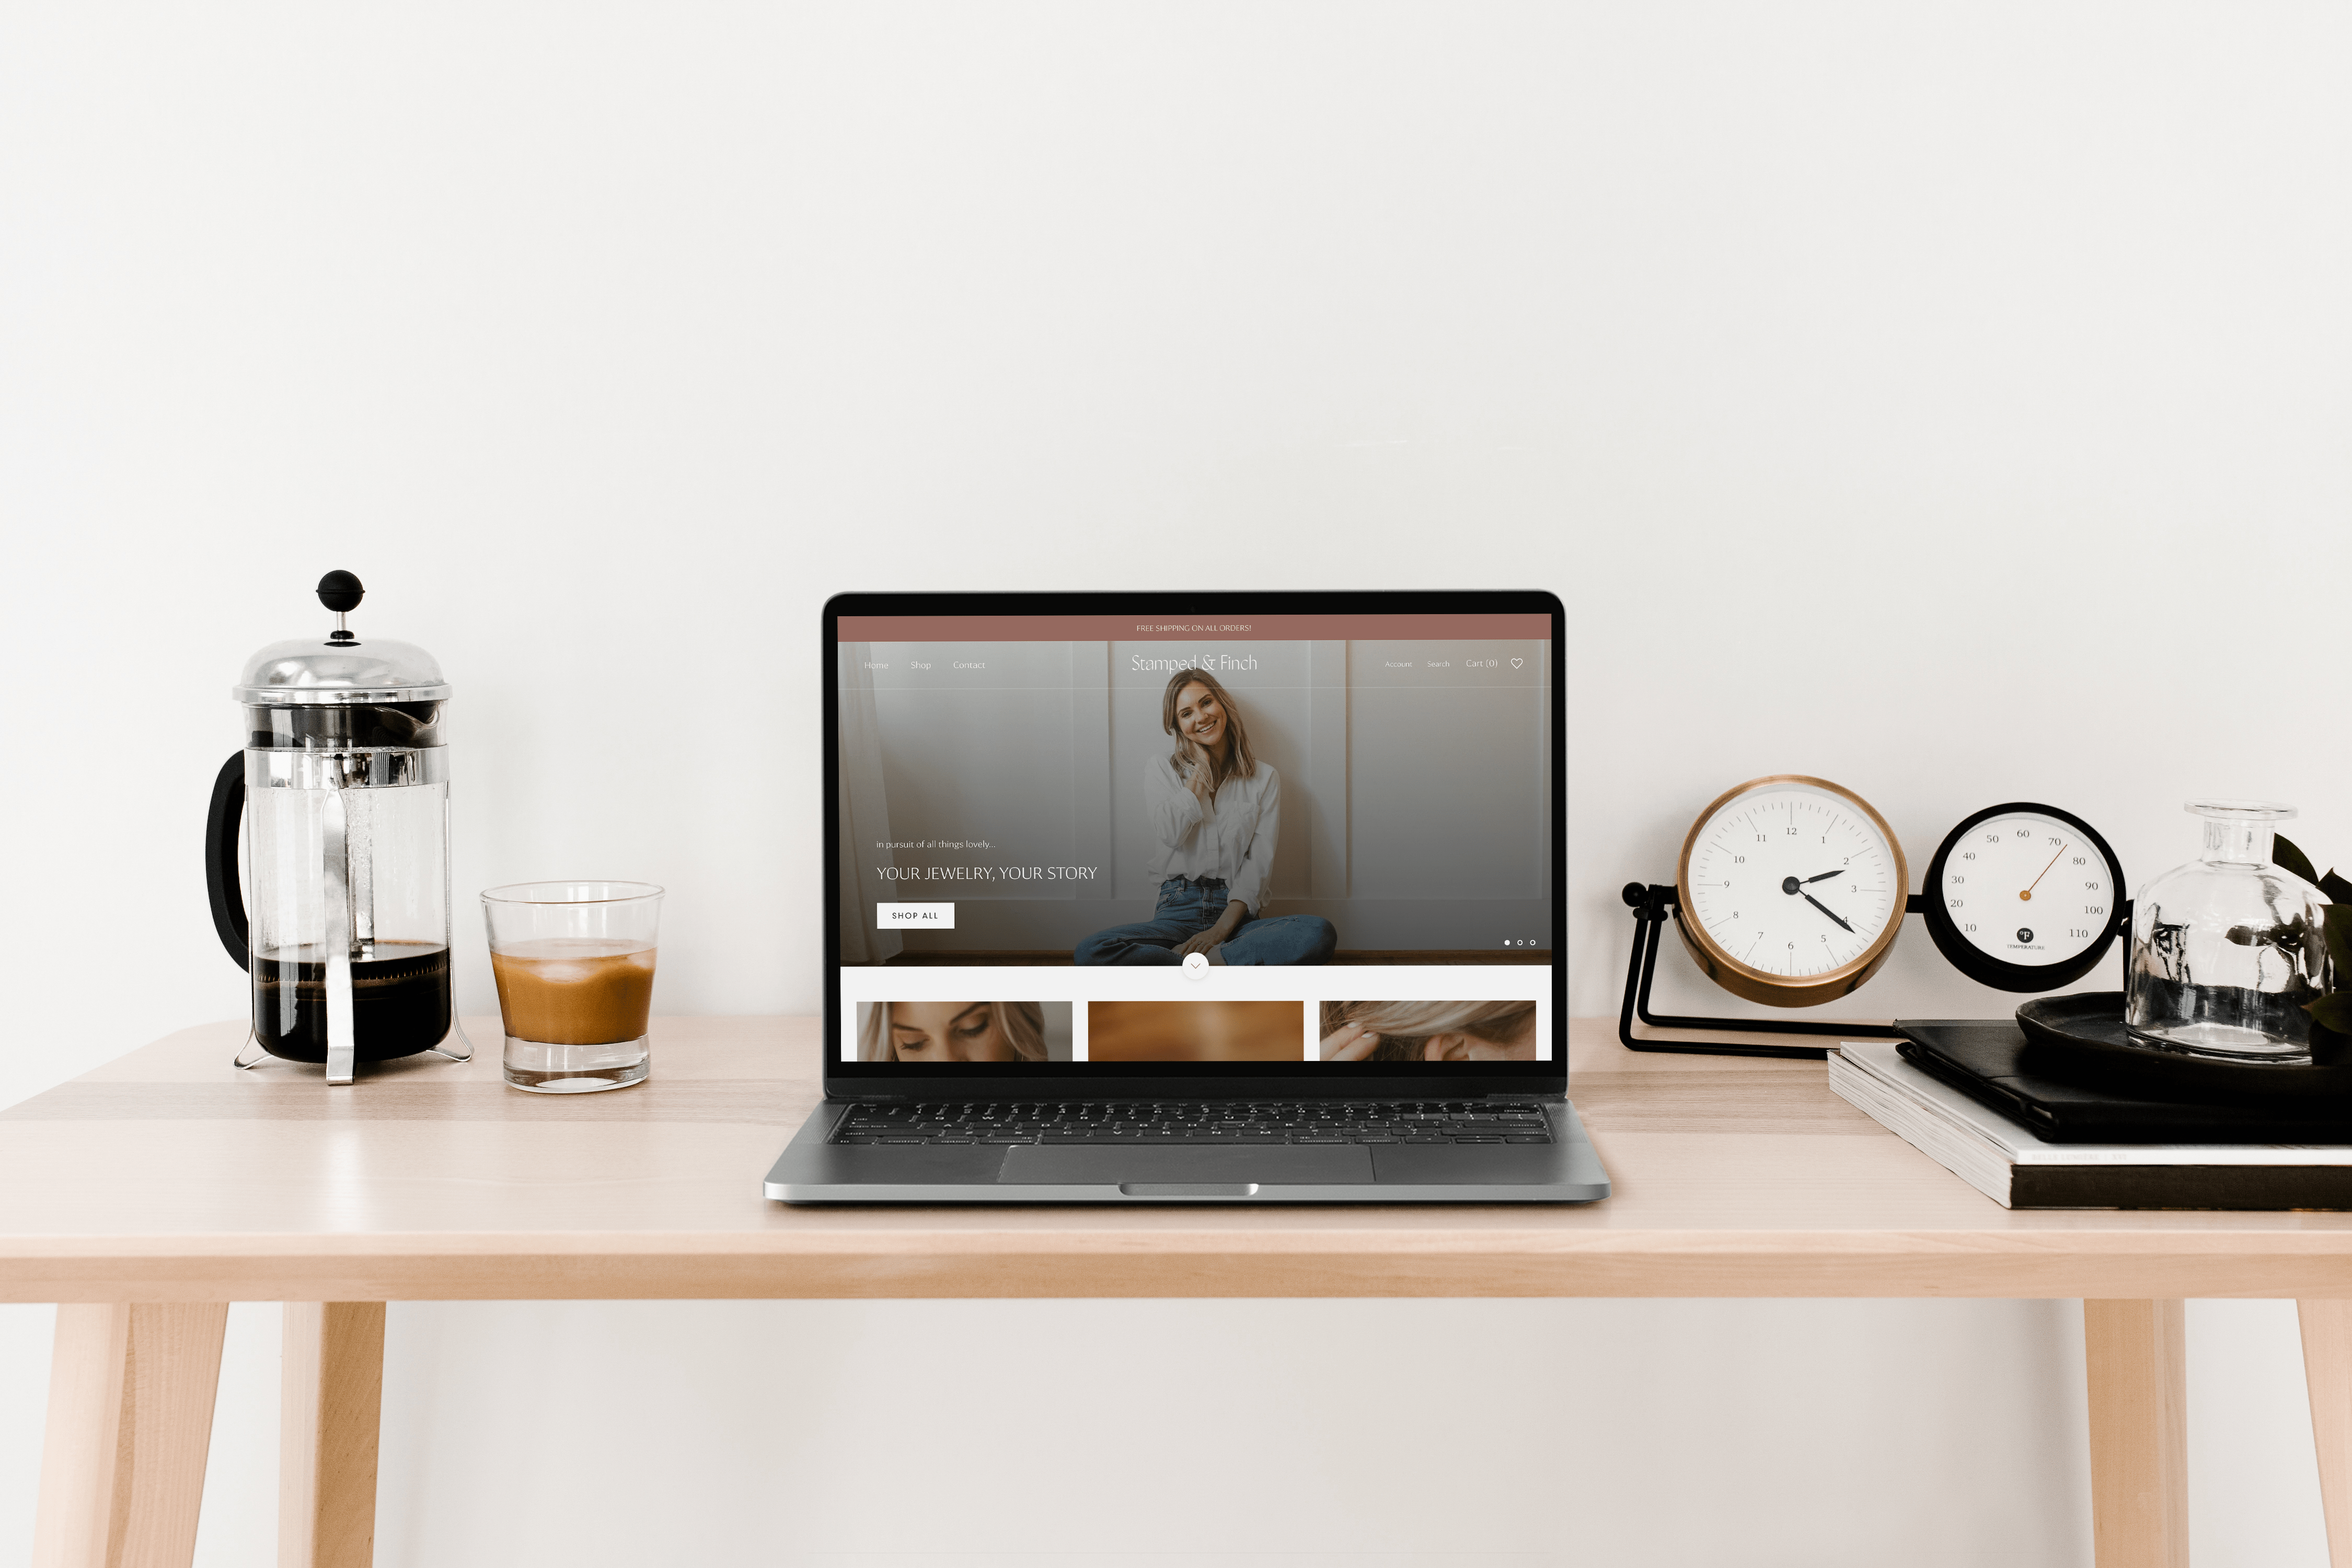 Learn the top 5 best Shopify themes for e-commerce entrepreneurs from experienced Shopify website designer, Taylor Anne Creative.